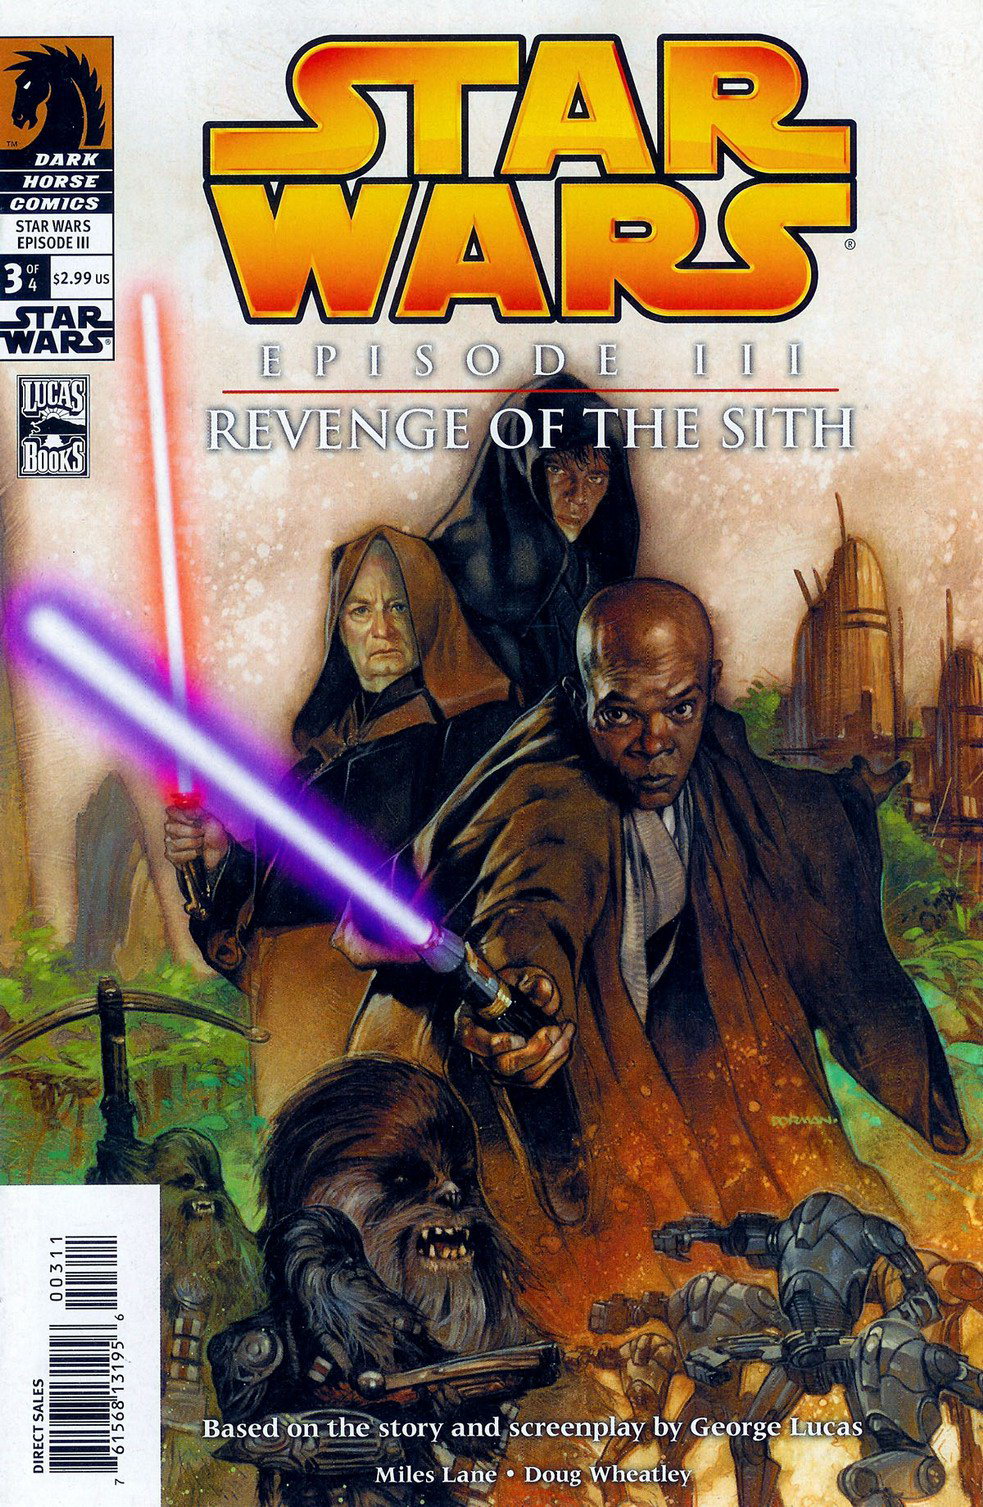 Issue 1 cover